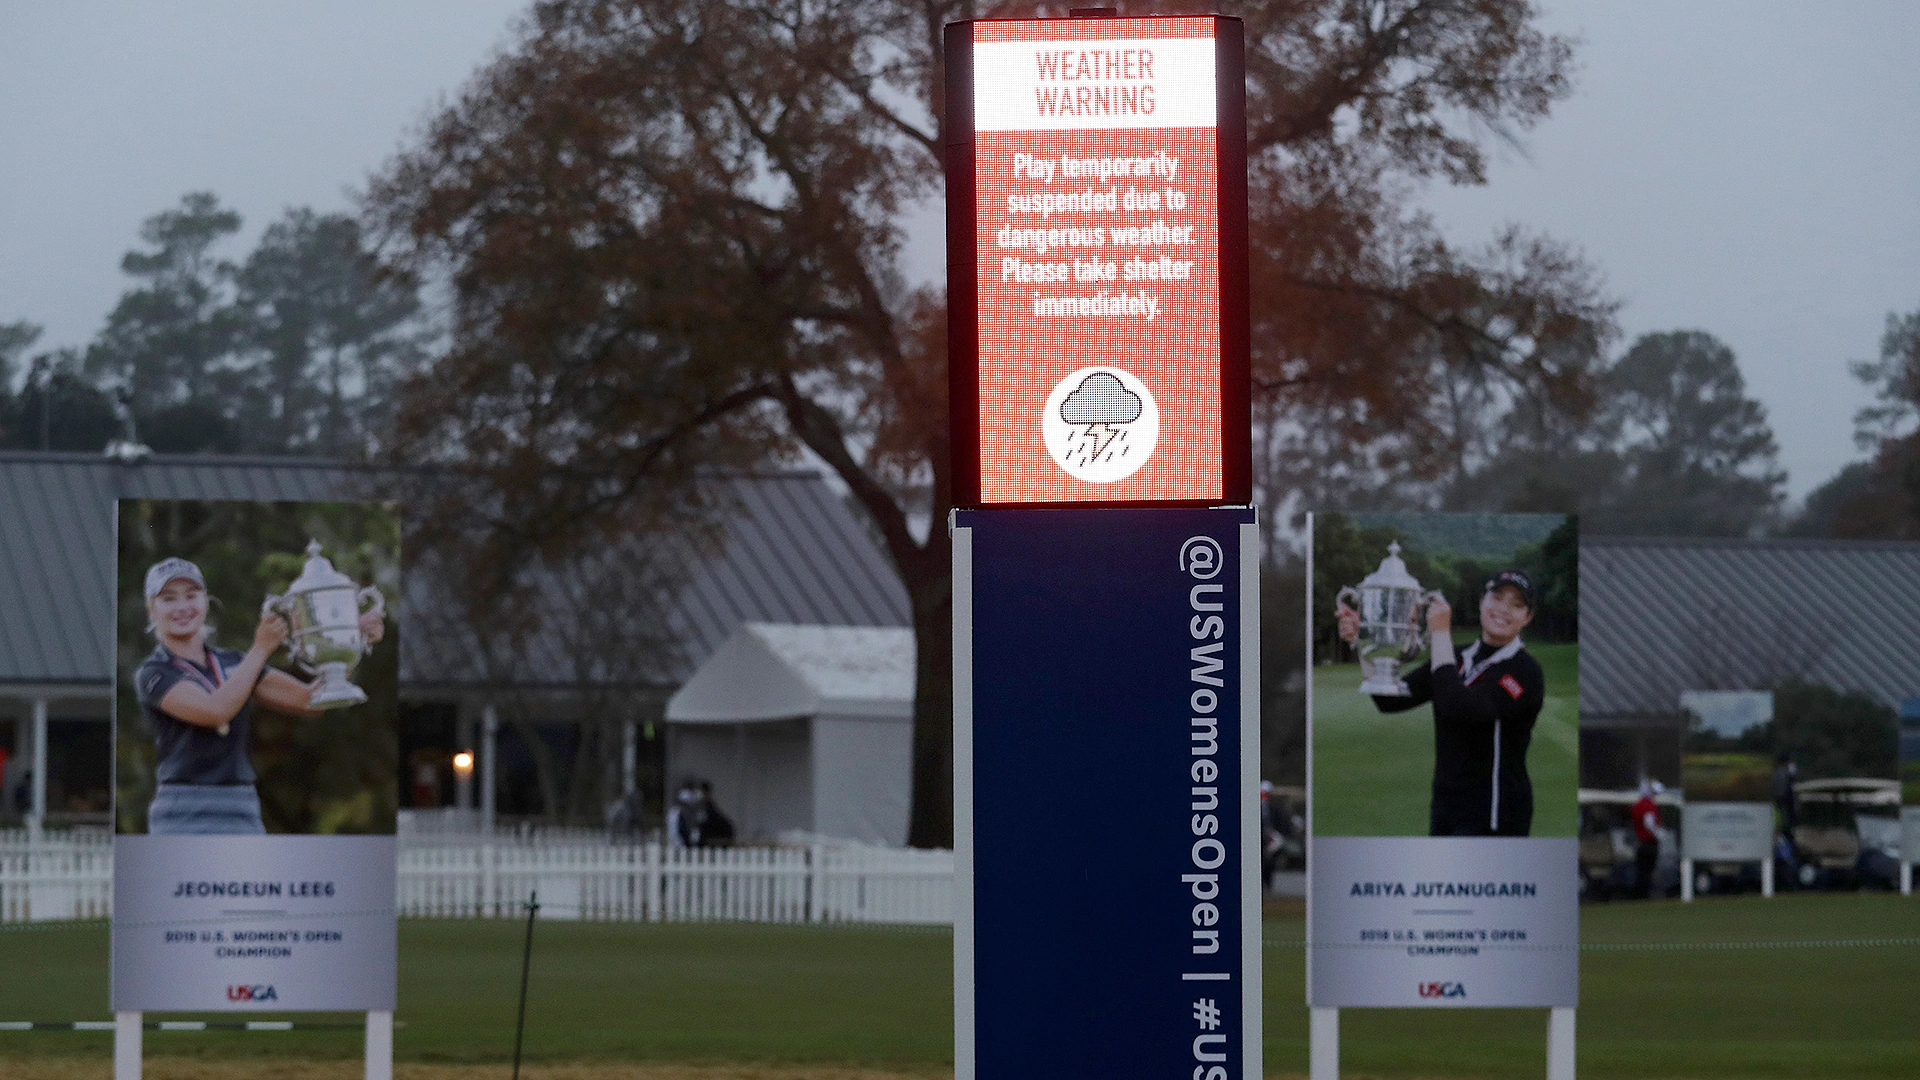 Play suspended for inclement weather Sunday morning at U.S. Women’s Open